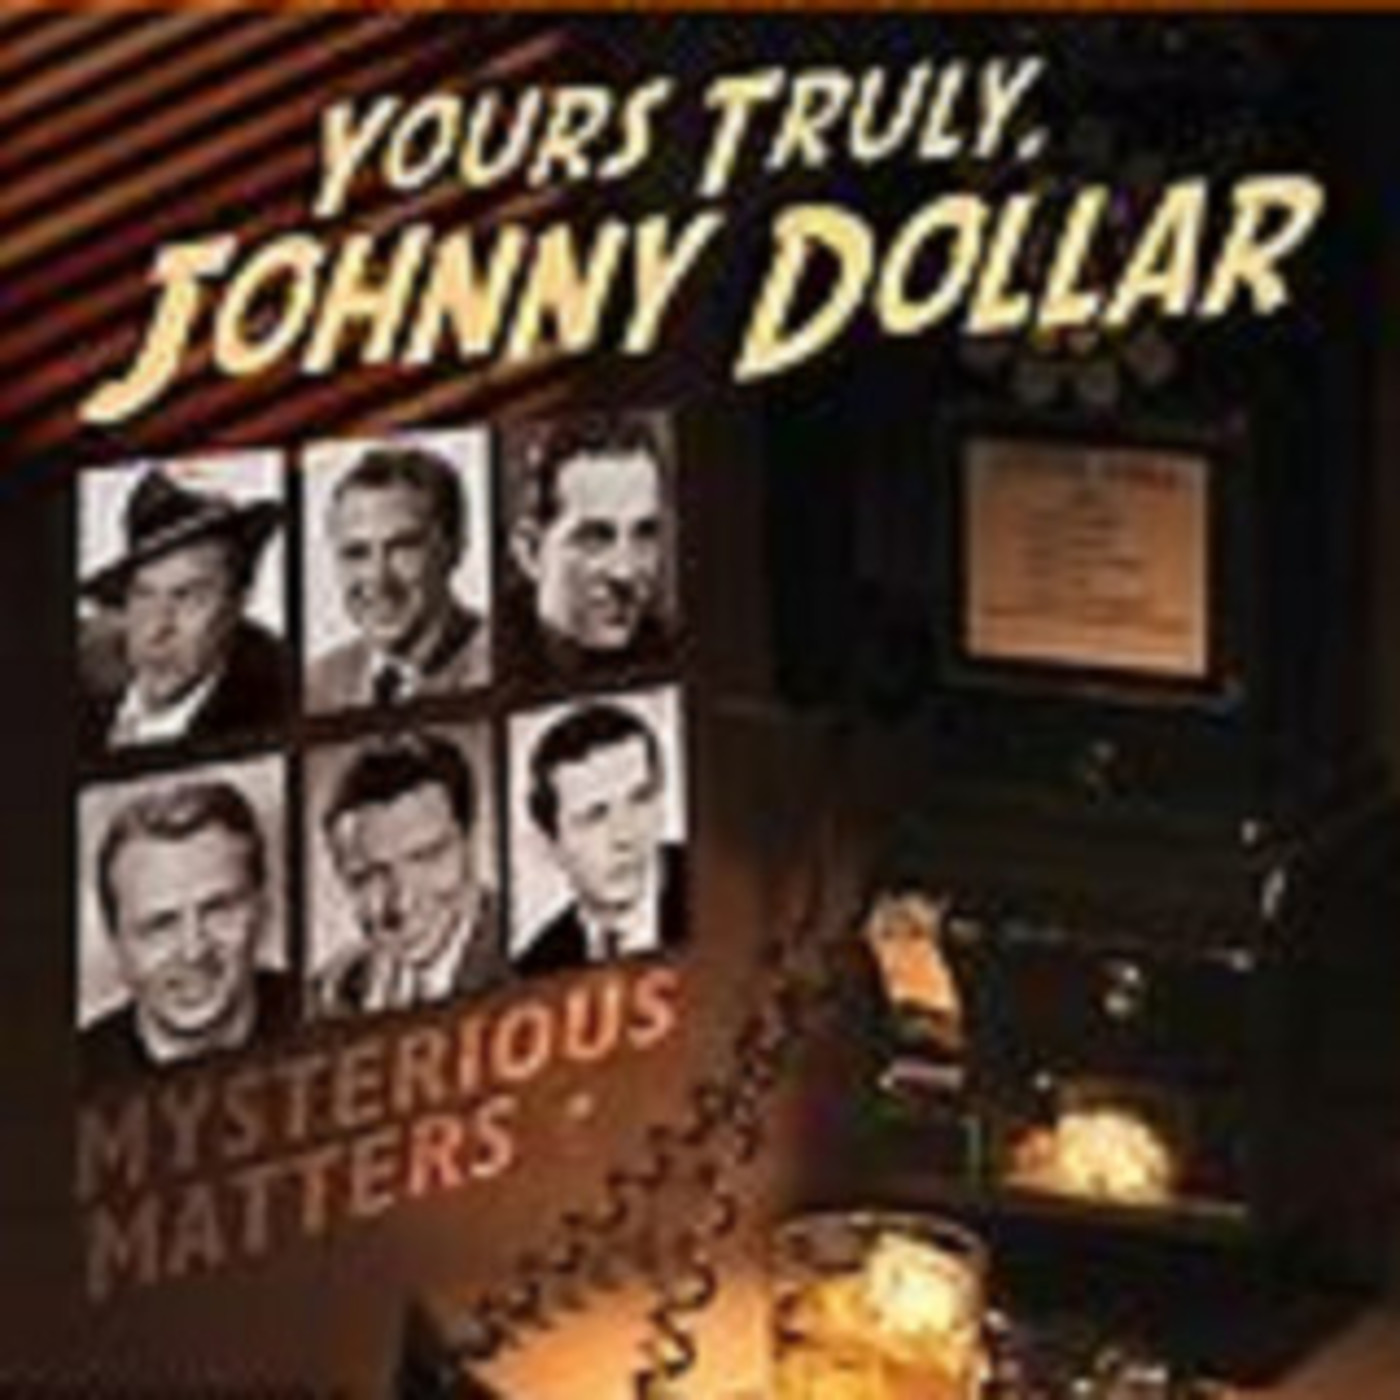 Yours Truly, Johnny Dollar - 042962, episode 789 - The Grand Canyon Matter